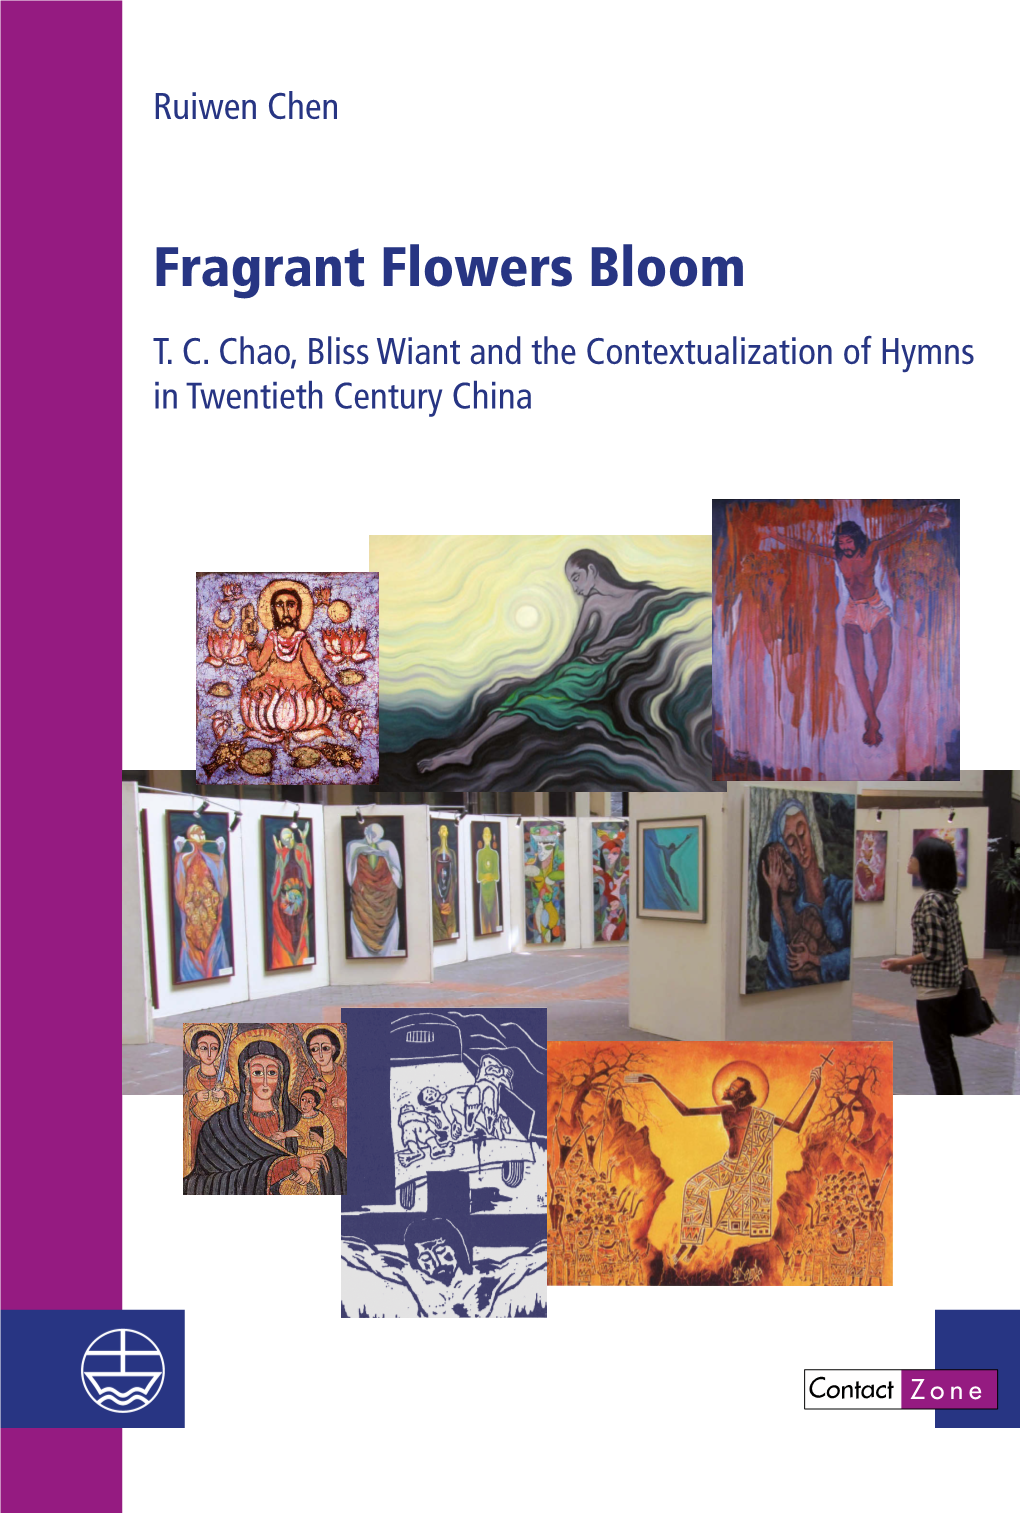 Fragrant Flowers Bloom. T. C. Chao, Bliss Wiant and The